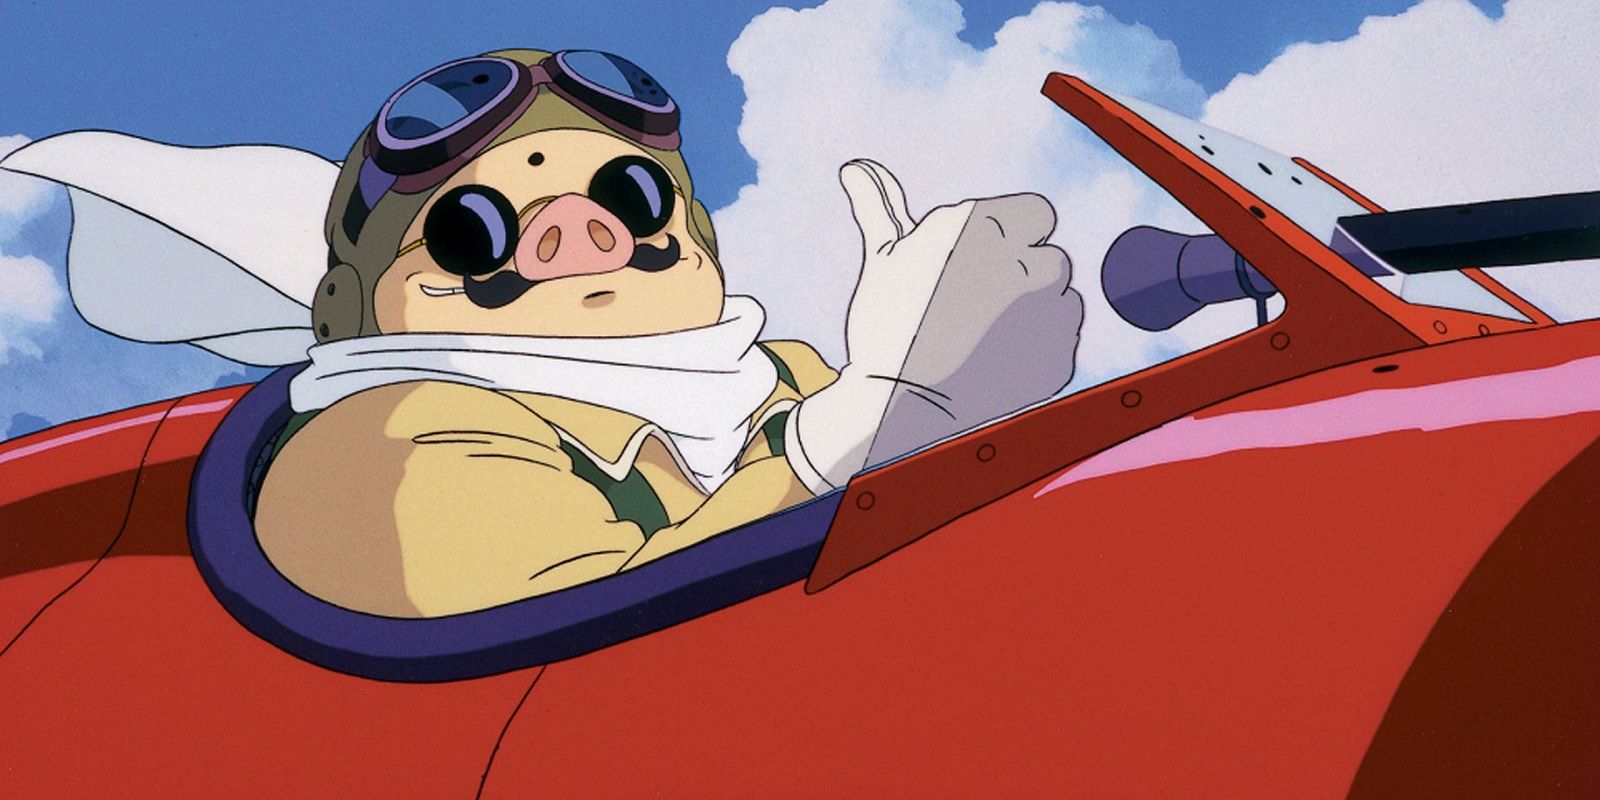 Porco Rosso flying his plane